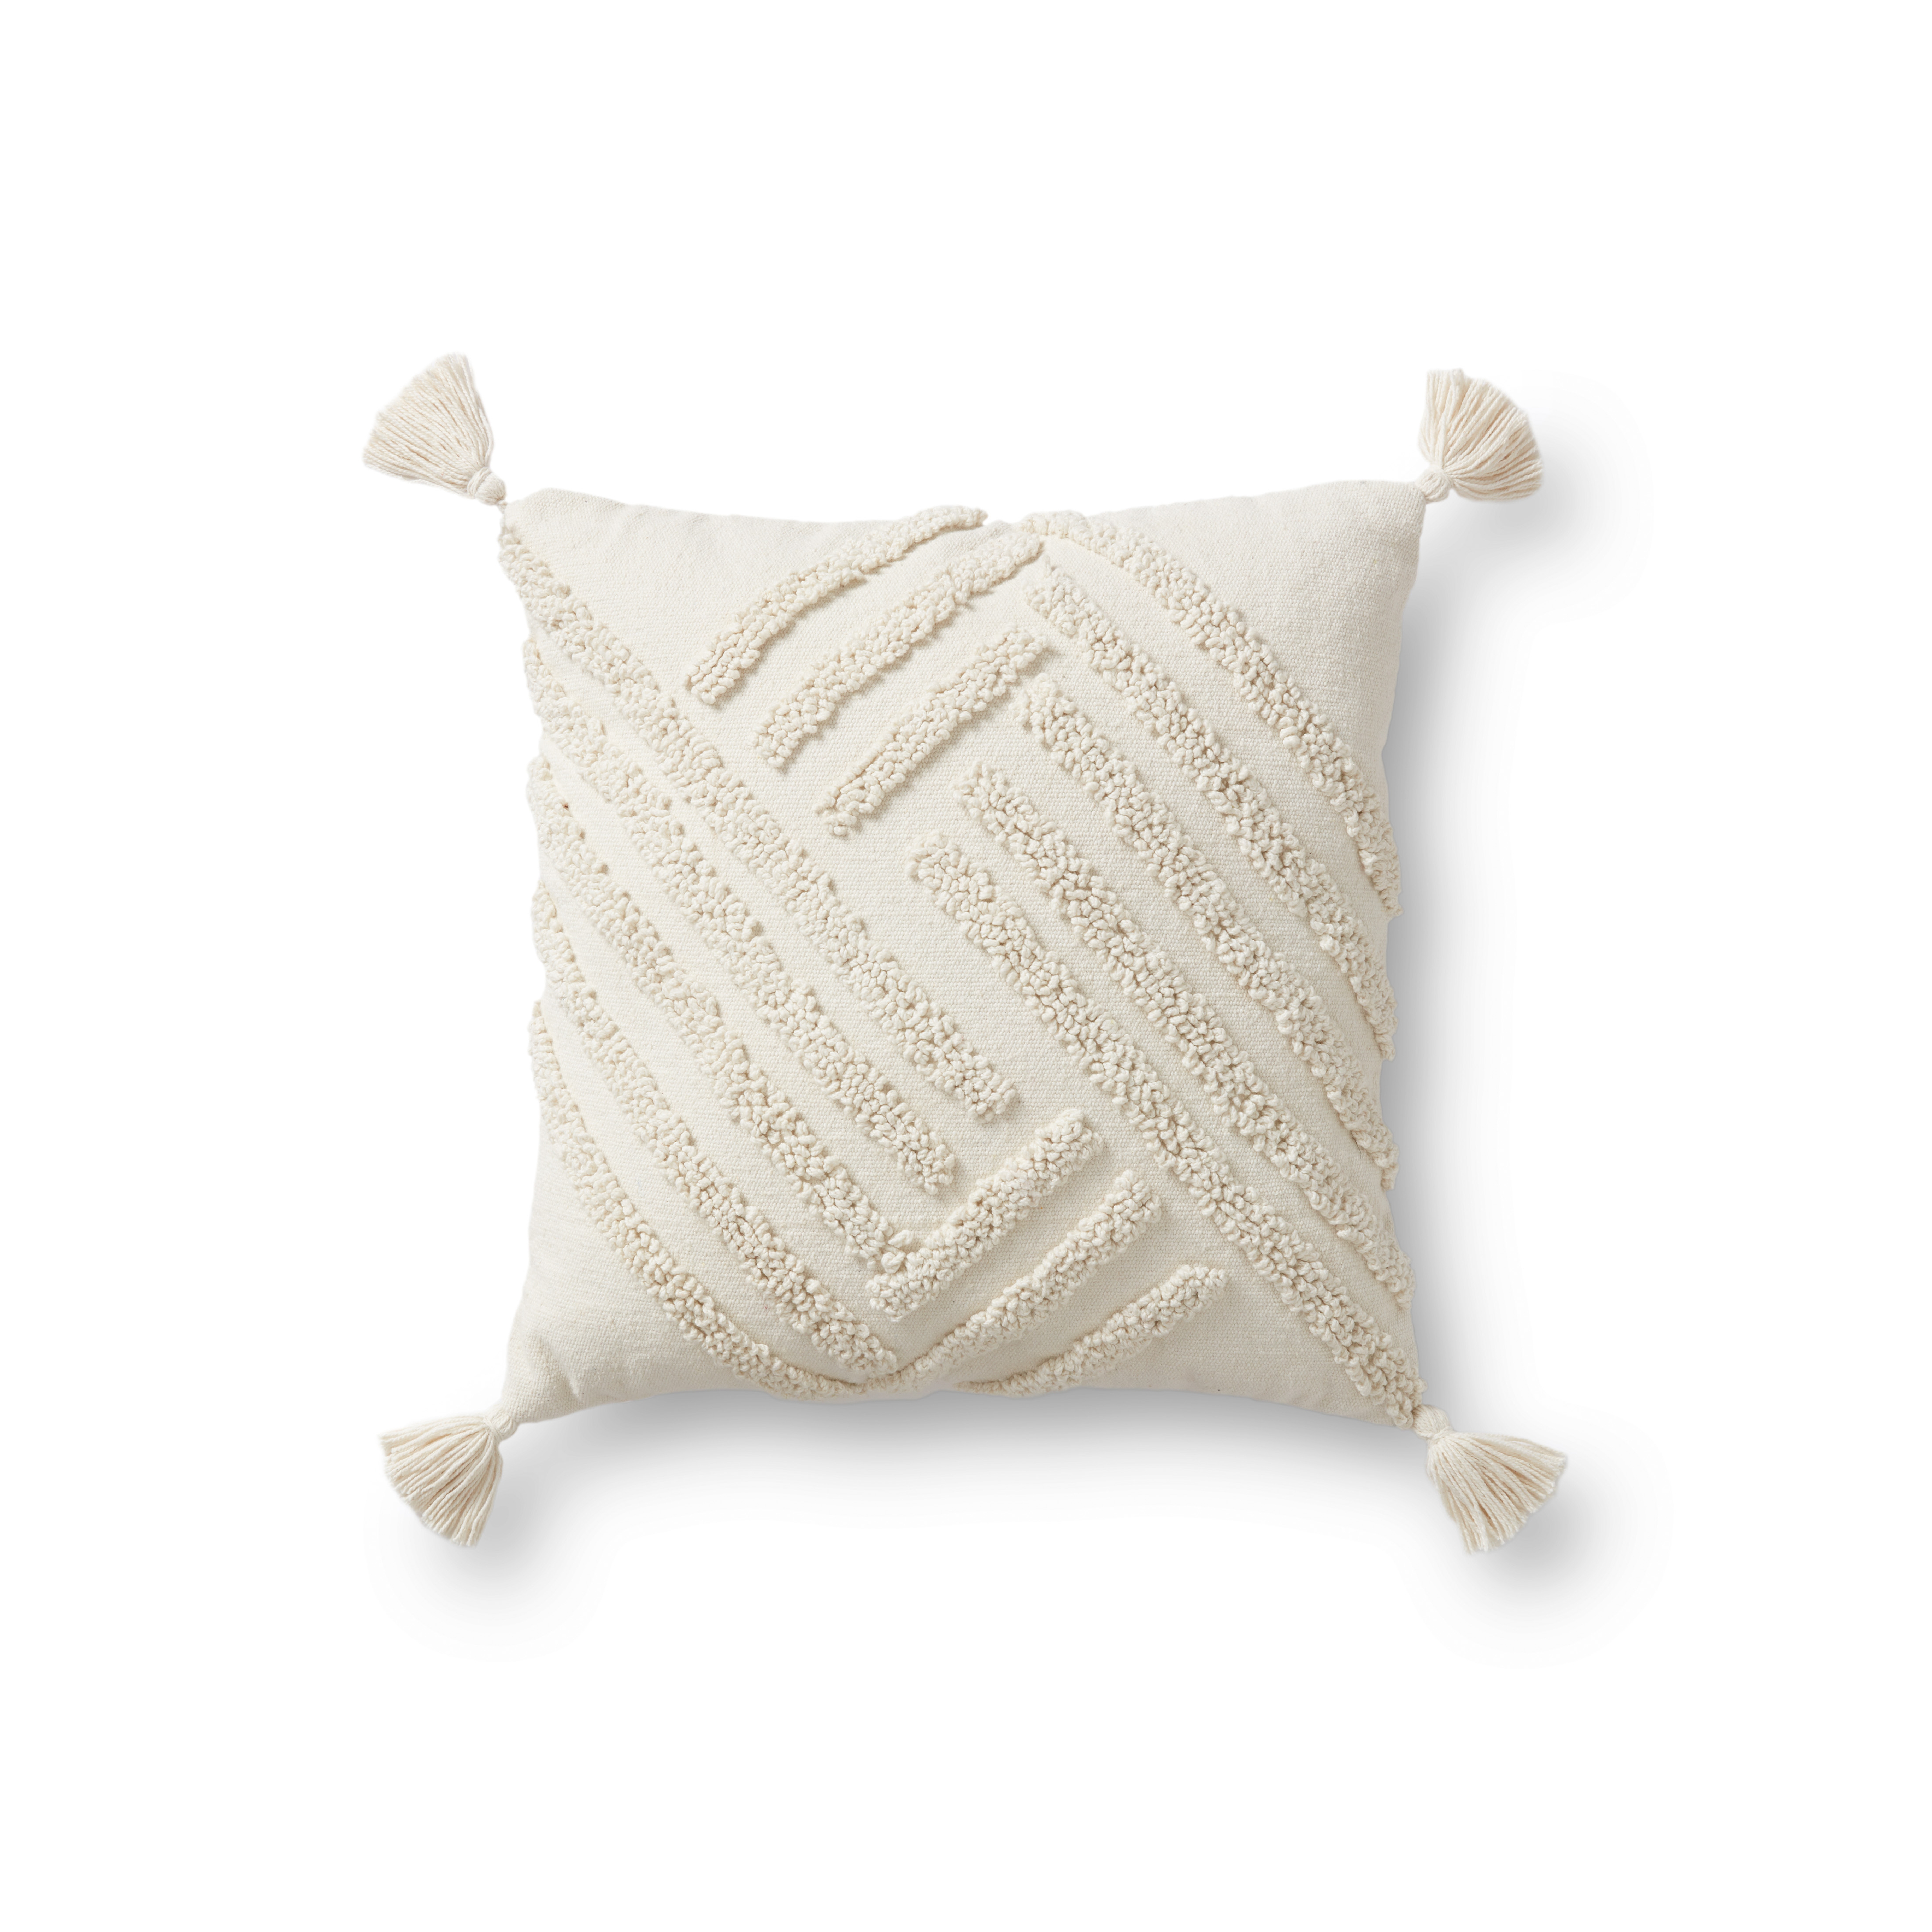 PILLOWS P1165 IVORY 18" x 18" Cover w/Poly - Magnolia Home by Joana Gaines Crafted by Loloi Rugs